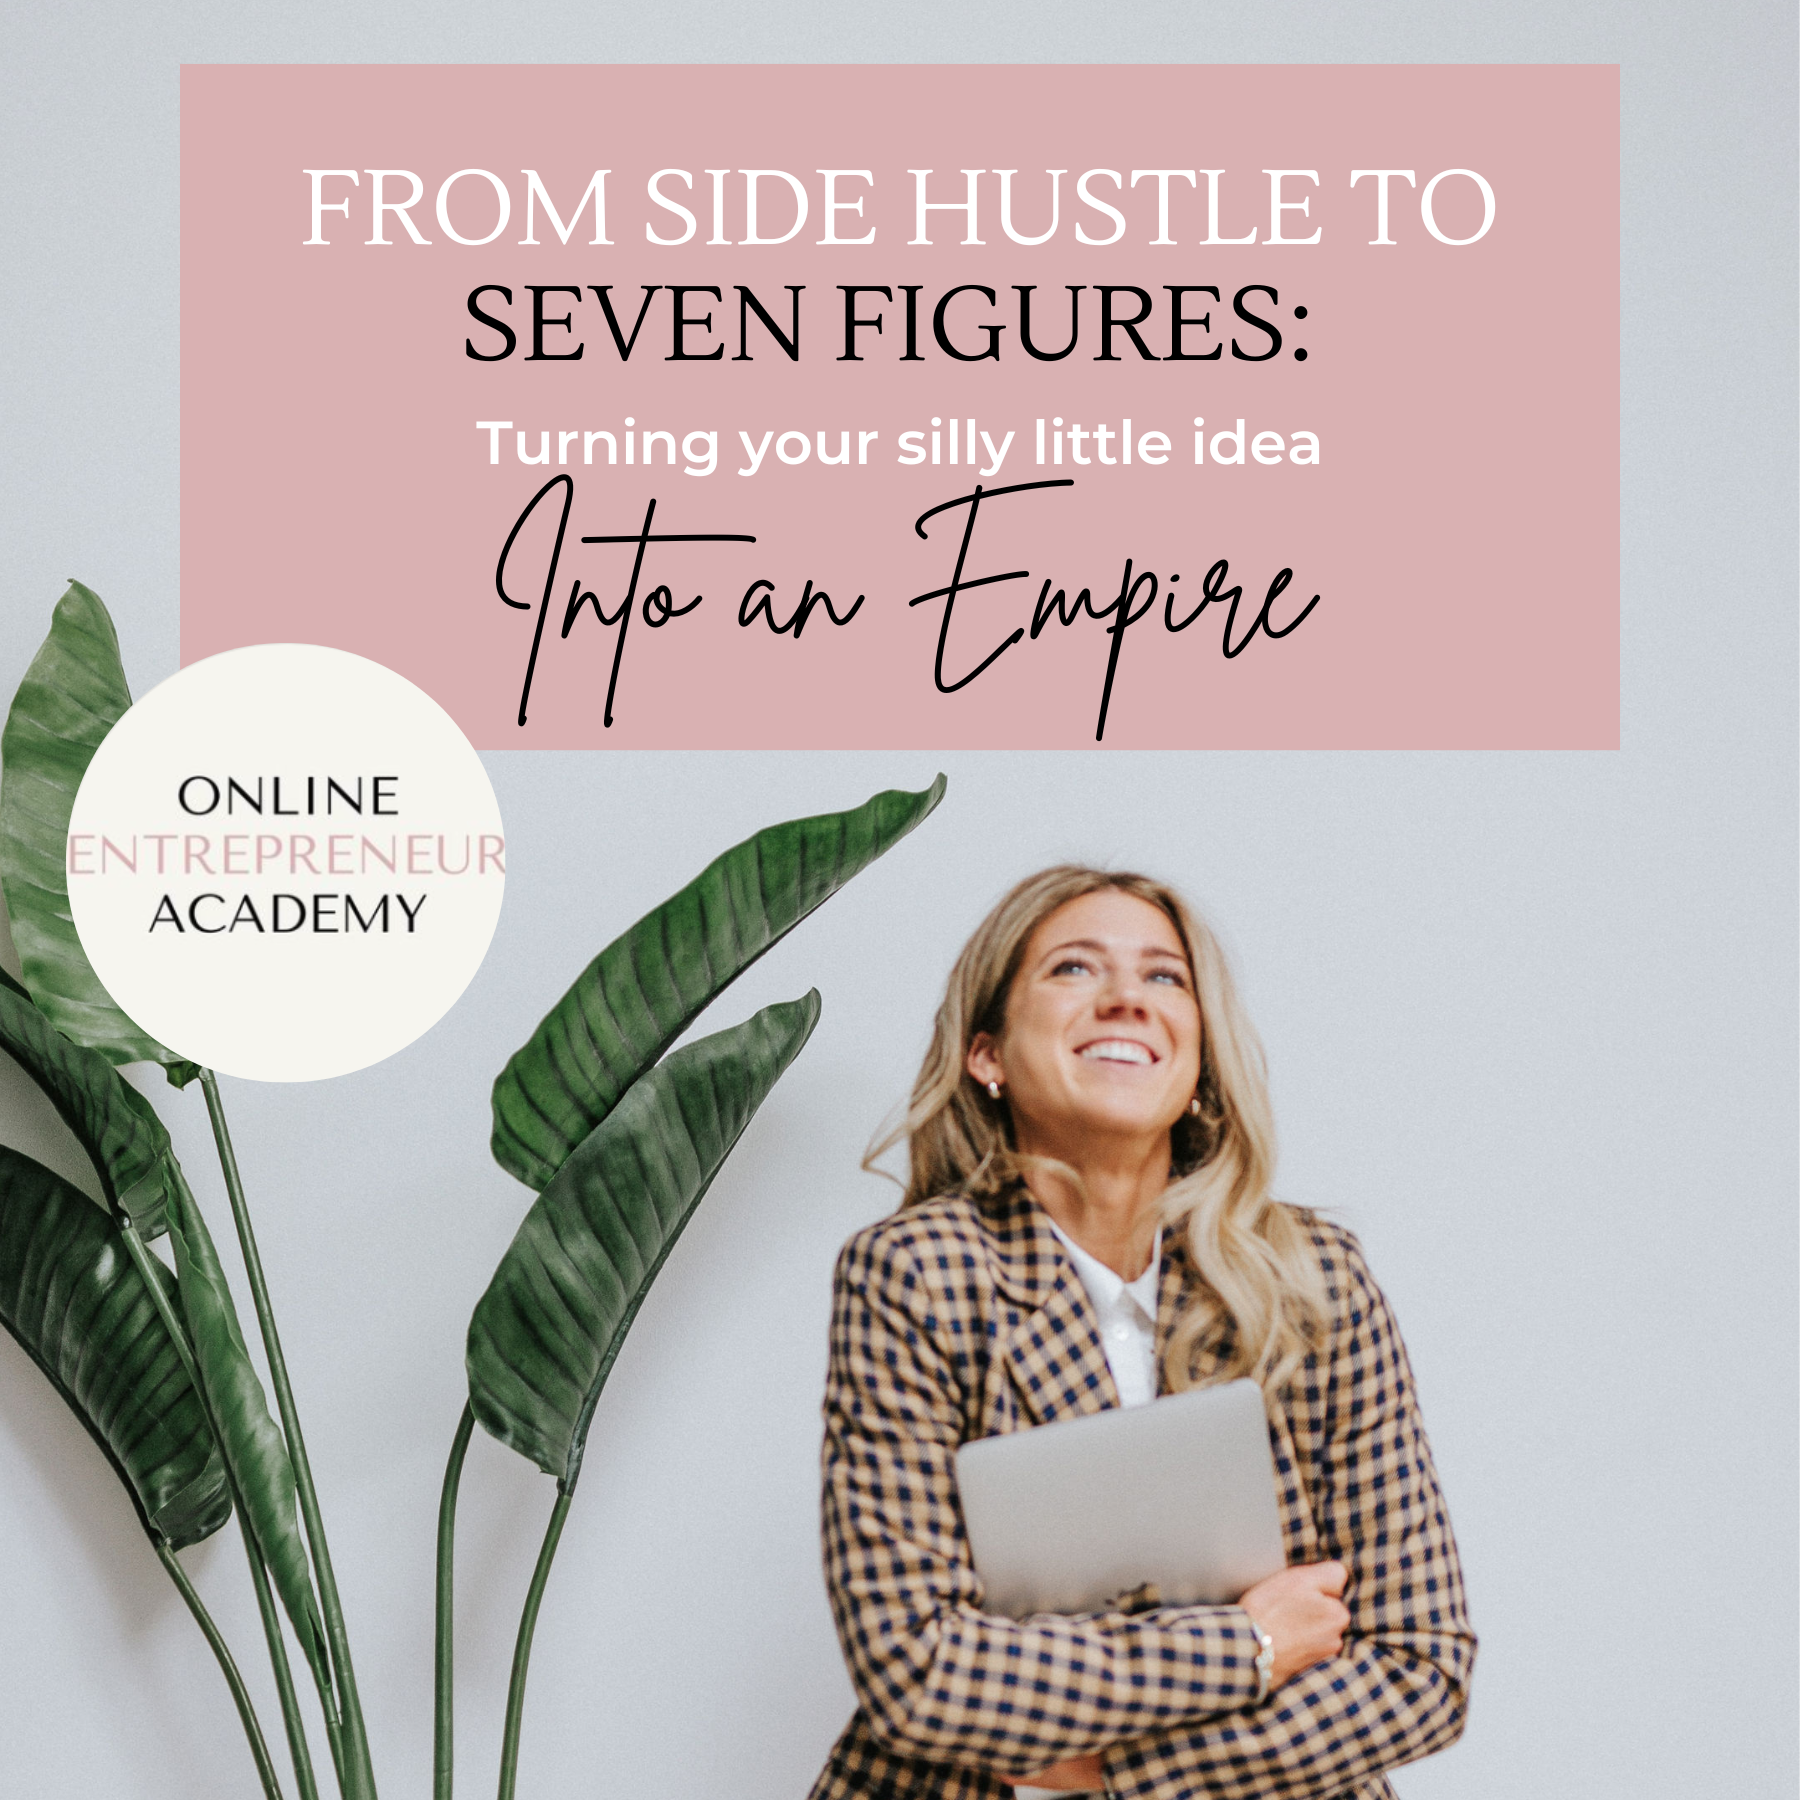 From Side Hustle To Seven FIgures. Turning Your Silly Little Idea Into An Empire.